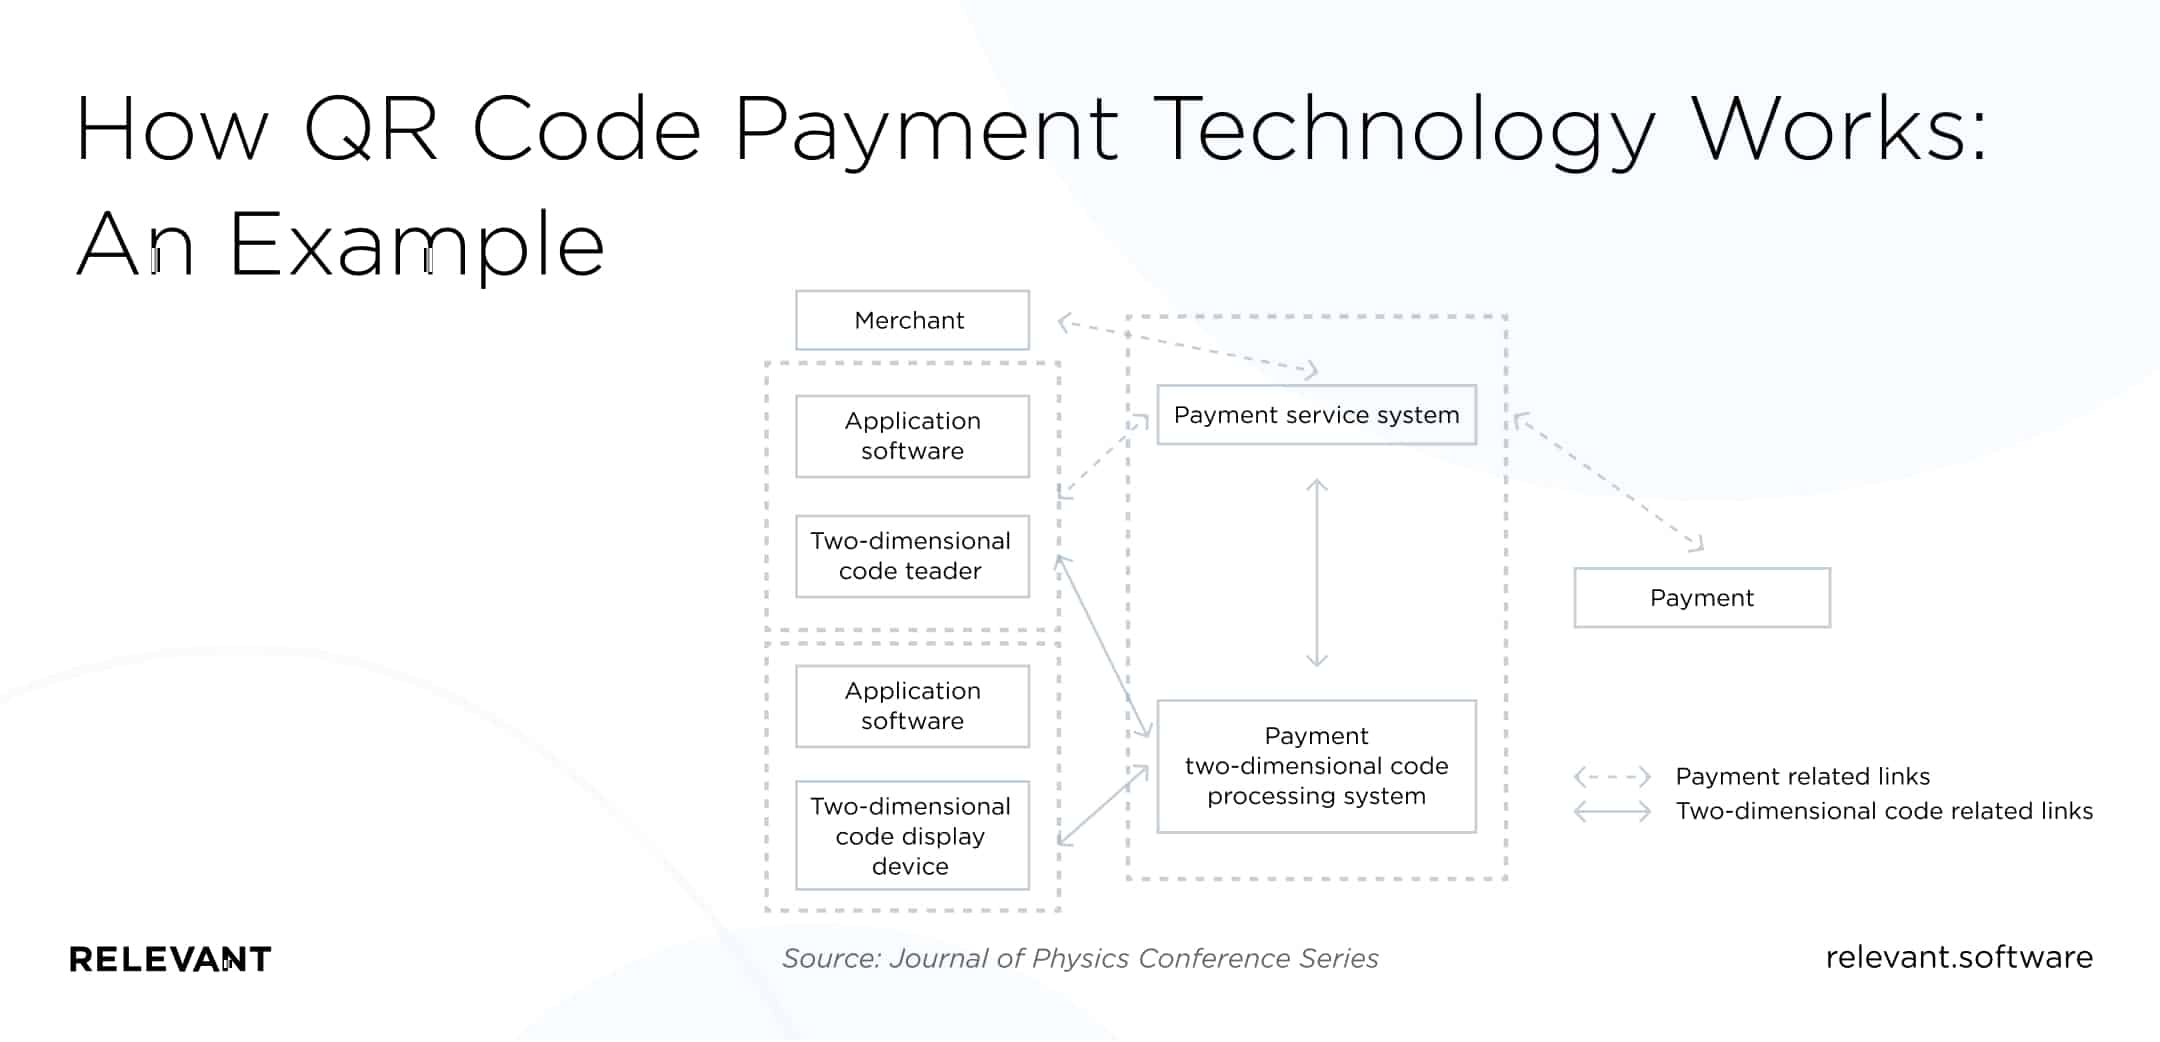 How QR code payment technology works: An example